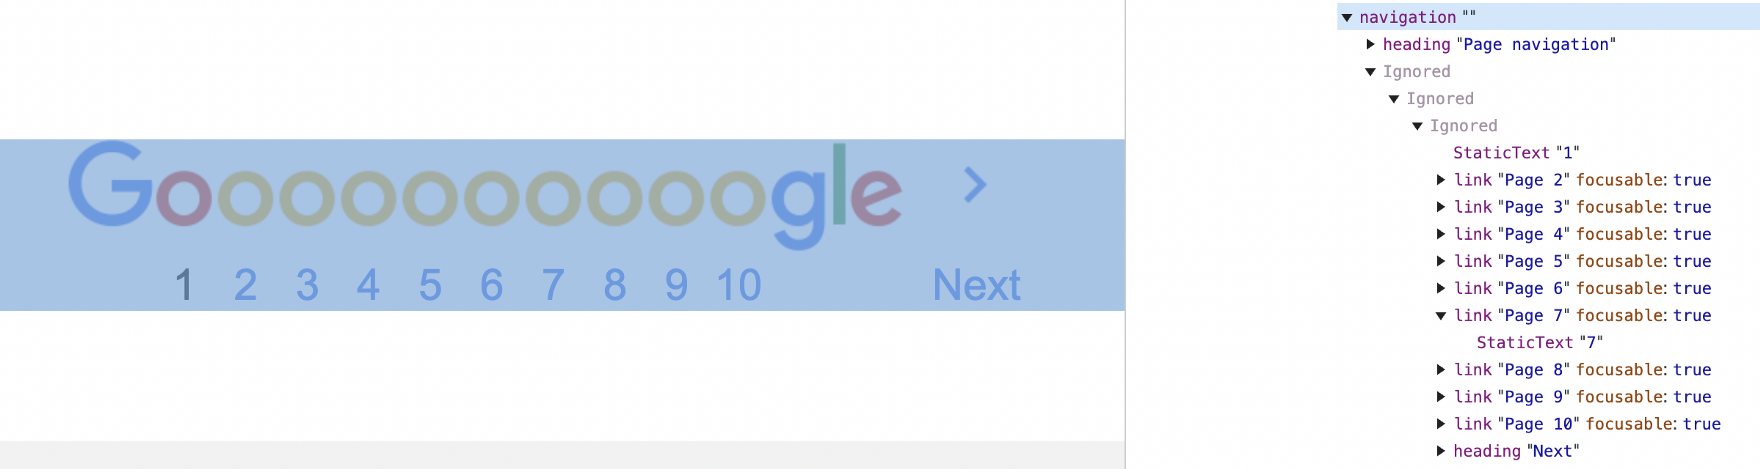 A screenshot of the “Goooooooogle” graphic in Google’s pagination, side by side with its accessibility tree showing a simple list of links to pages.